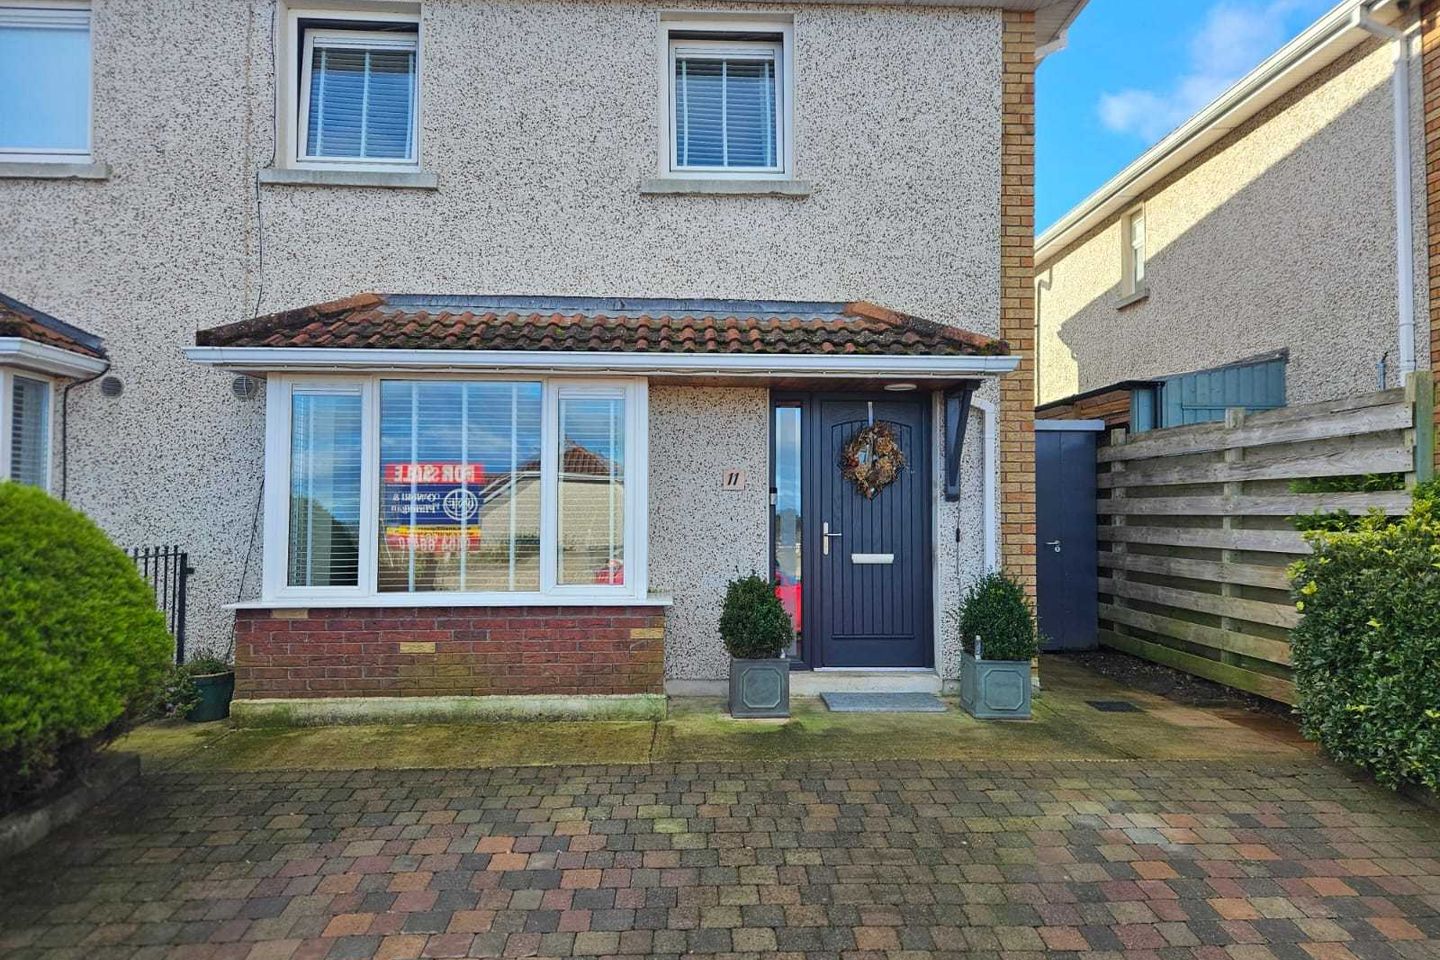 11 Broomhall Crescent, Rathnew, Co. Wicklow, A67Y865